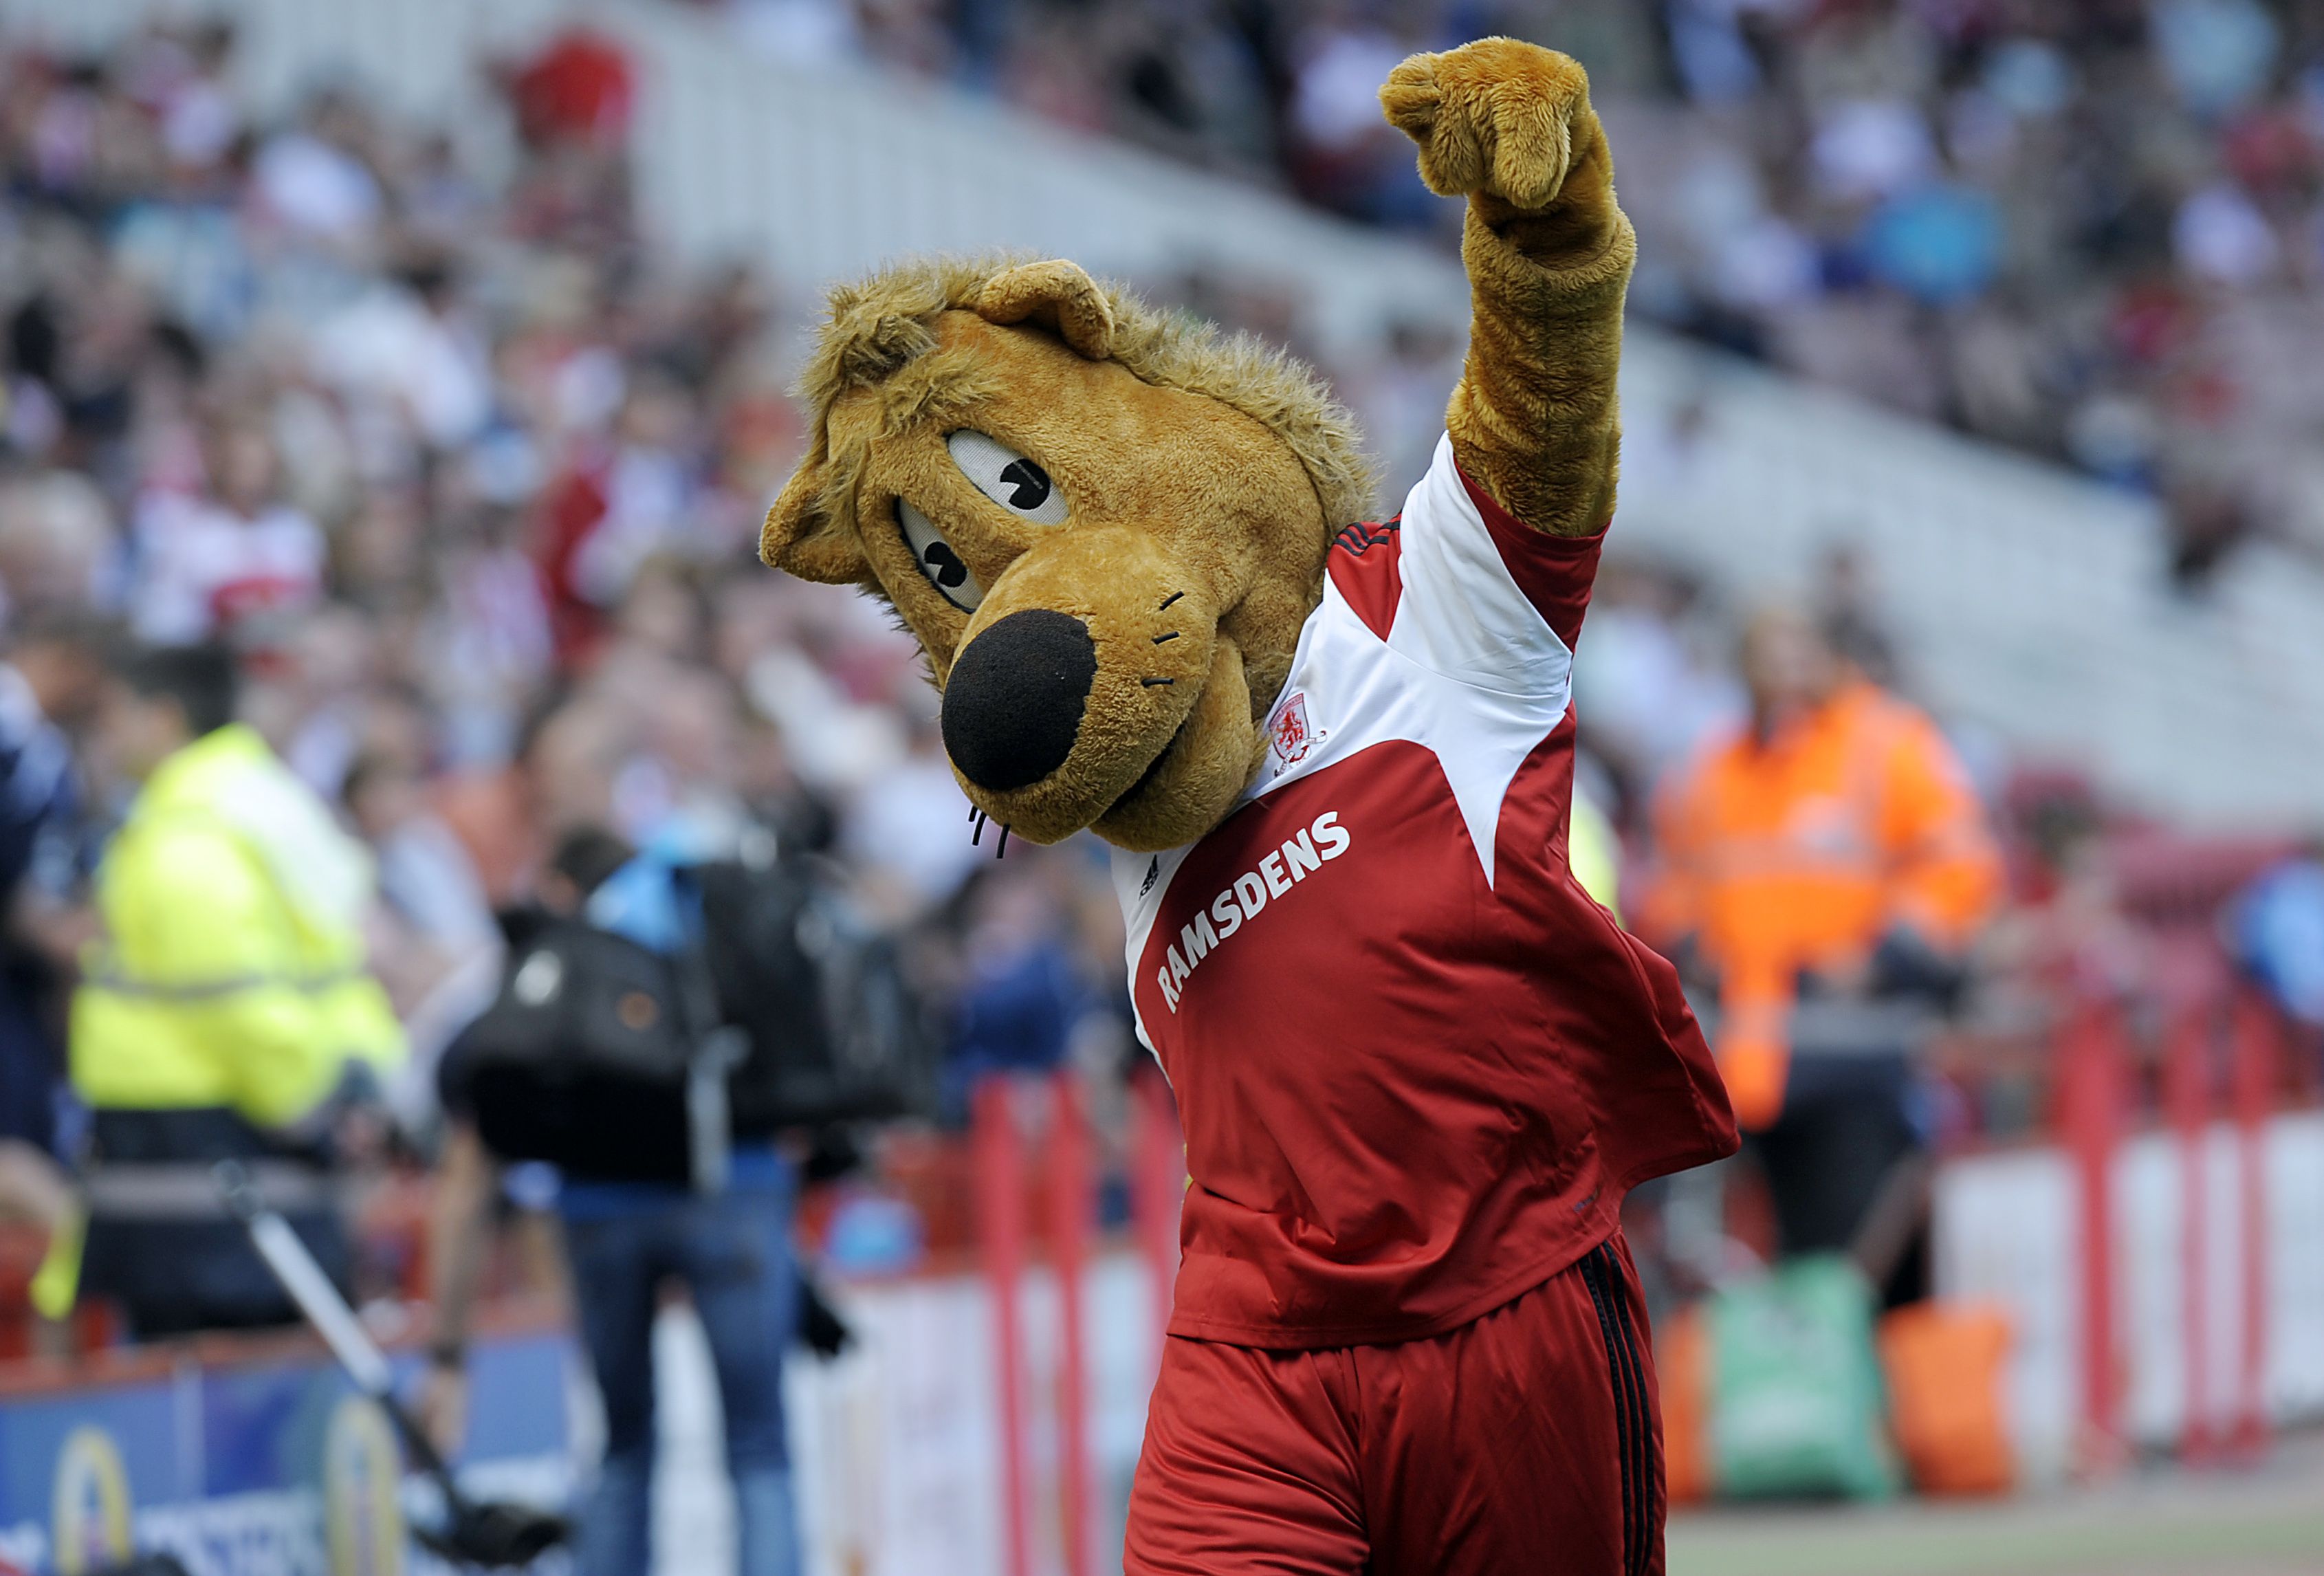 Middlesbrough Mascot Roary the Lion